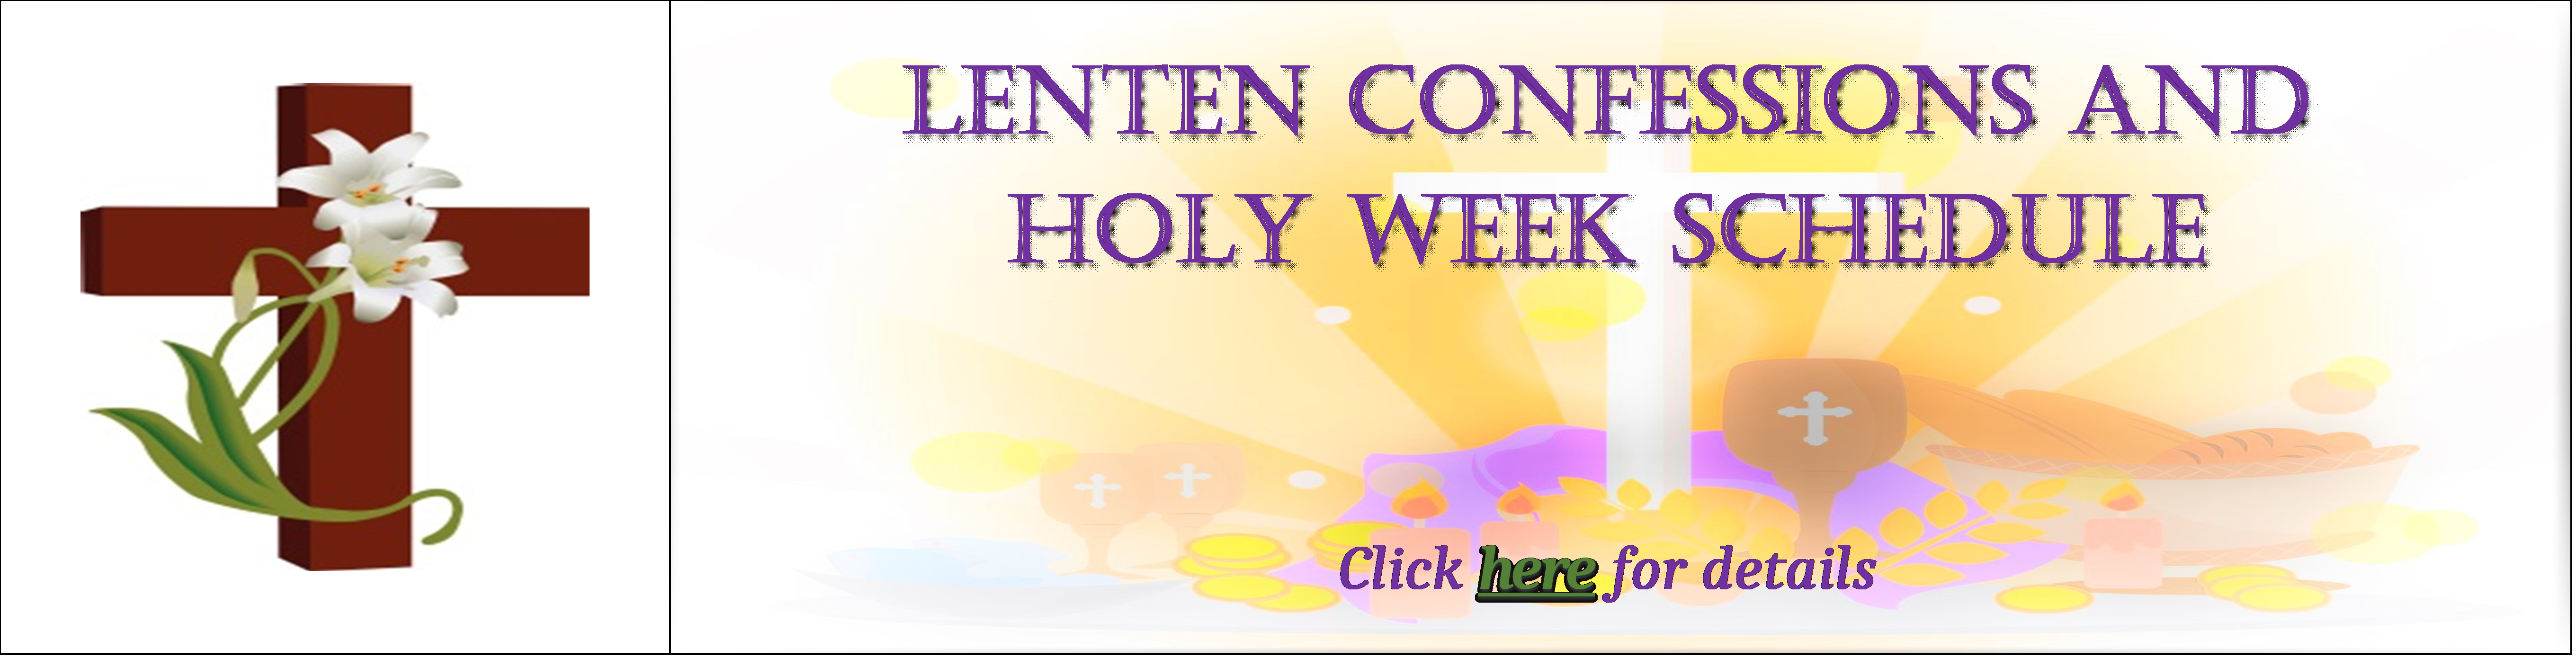 Lenten Confessions and Holy Week Schedule